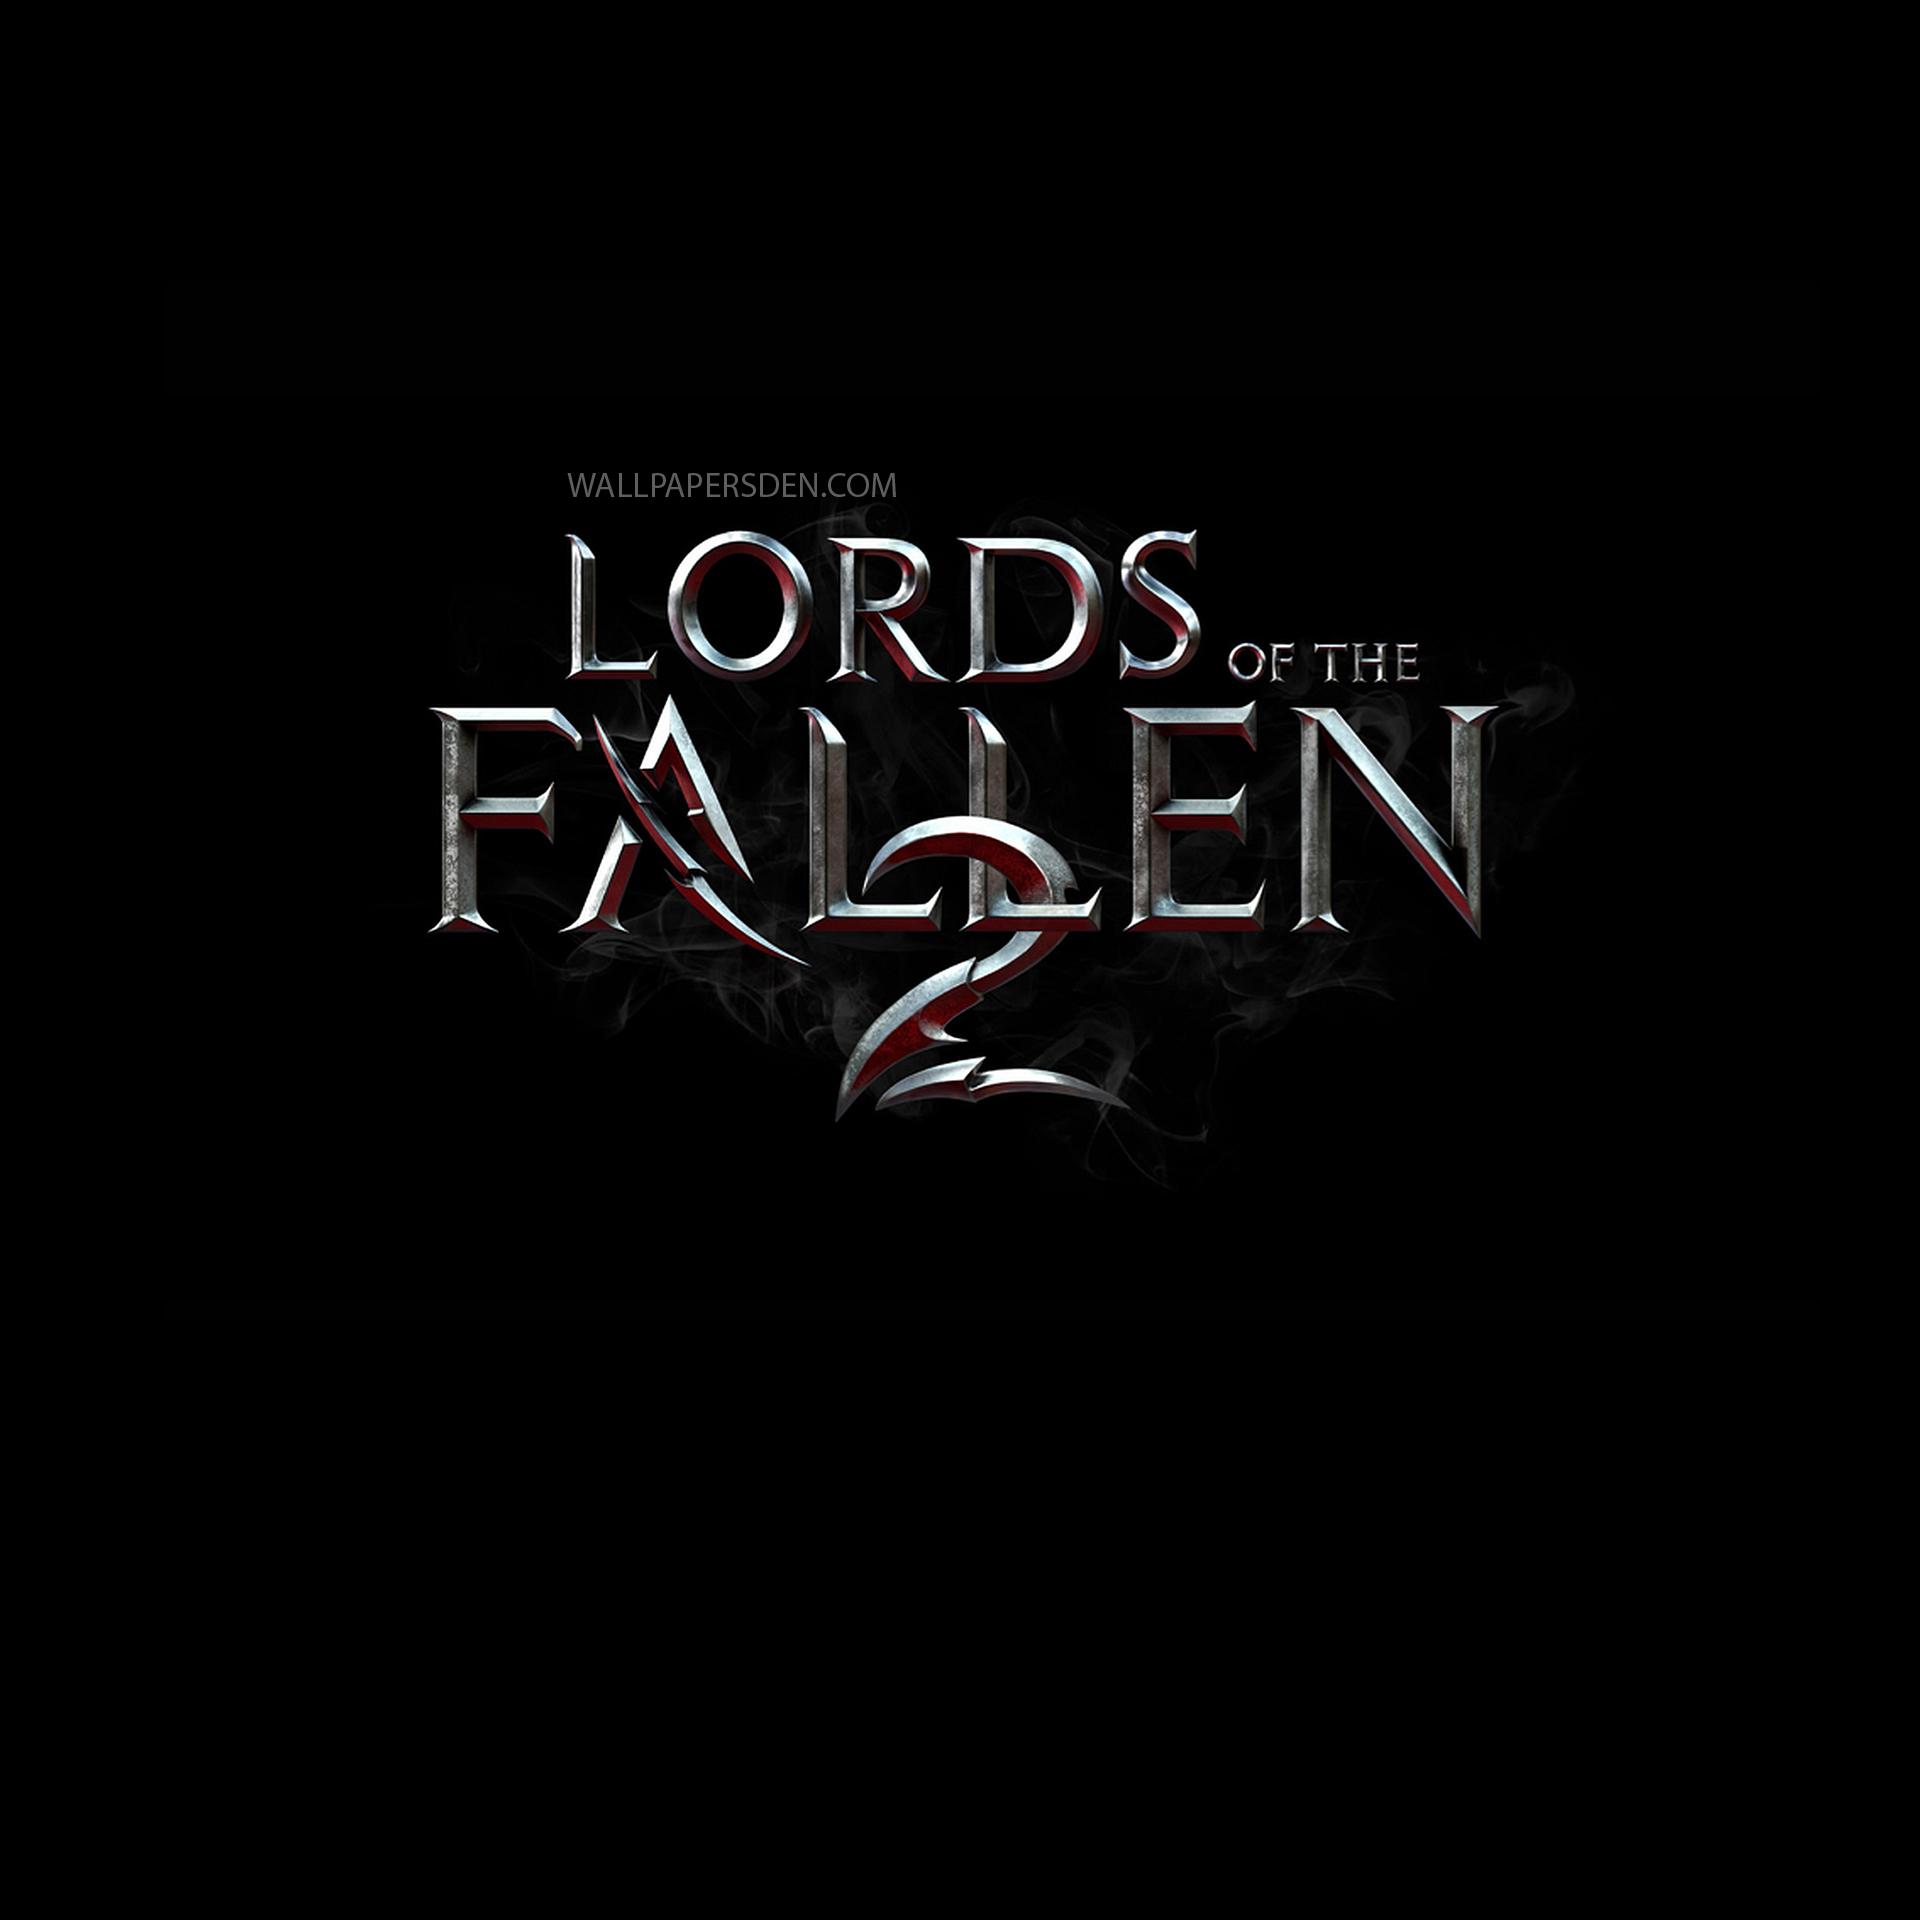 fallen lords condemnation donload